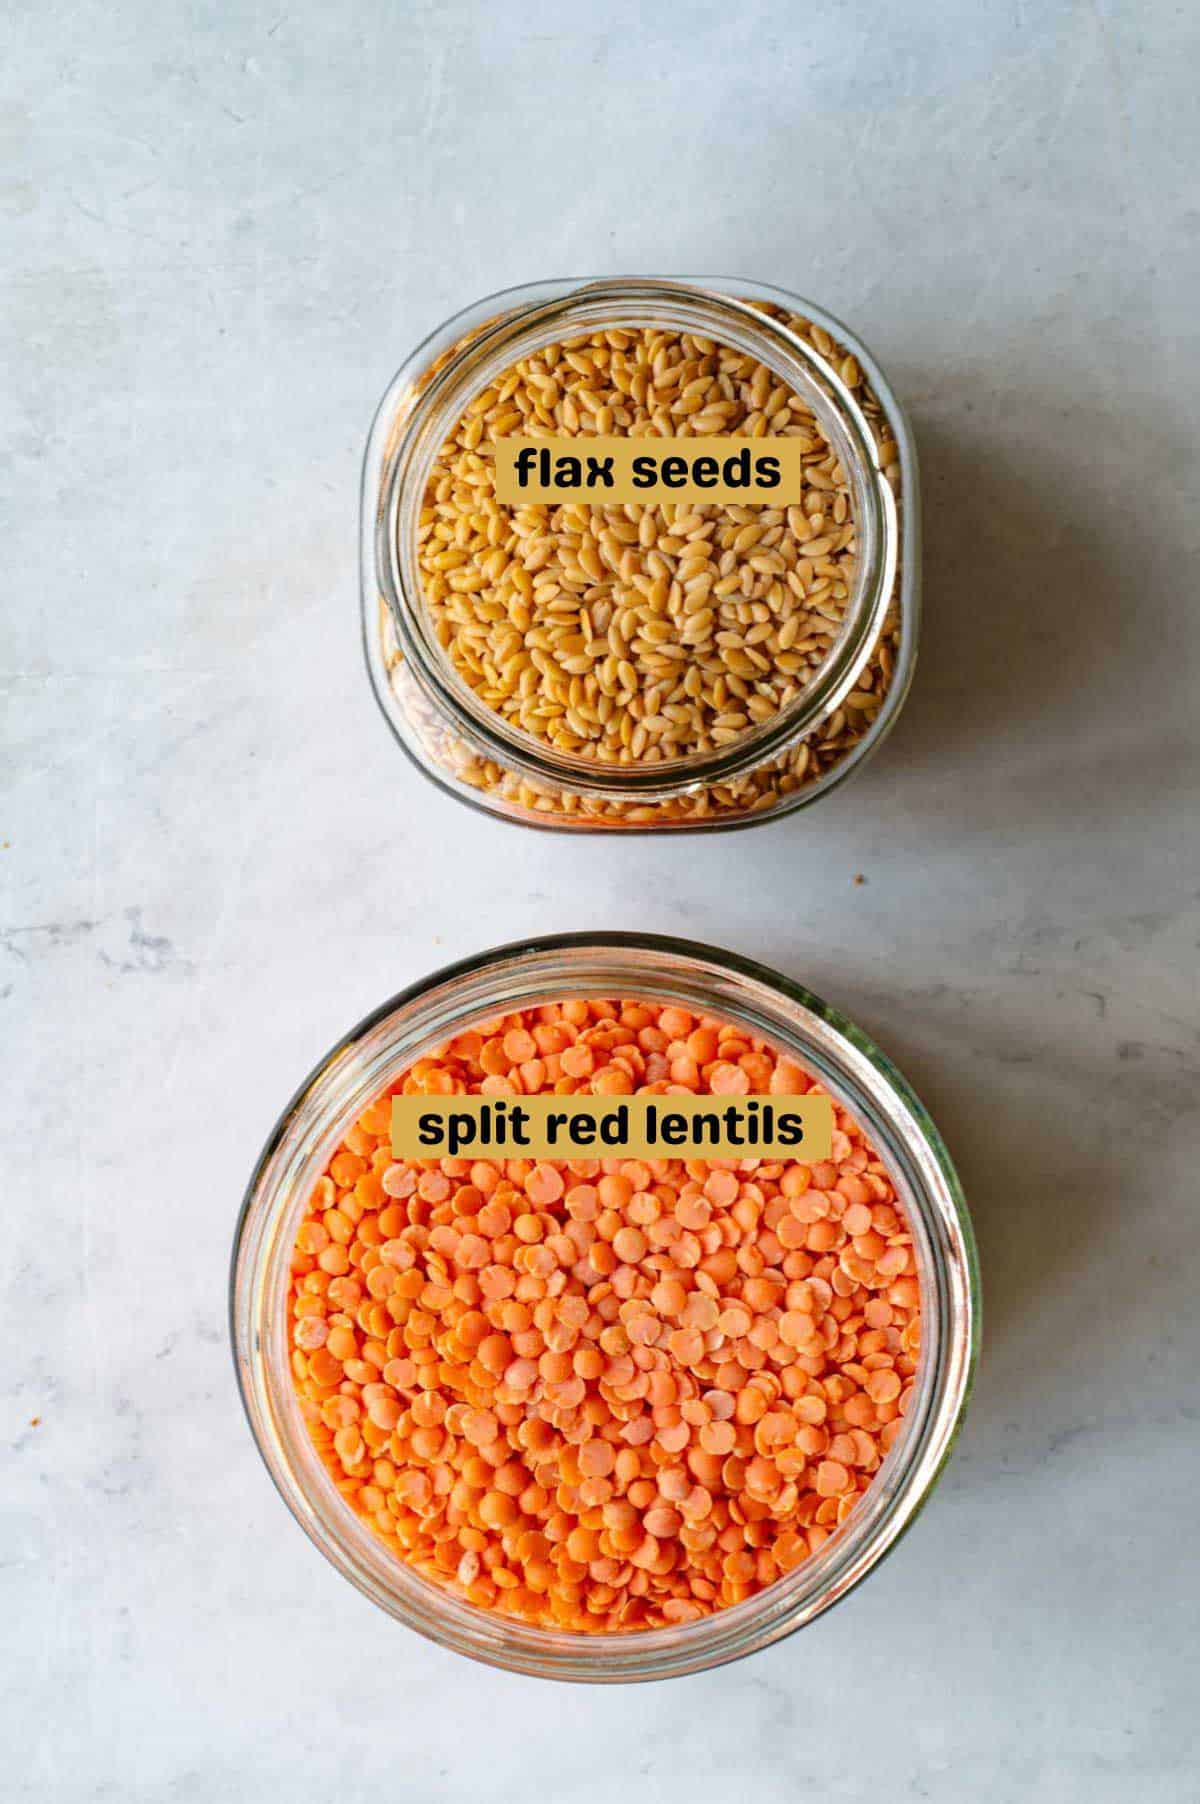 Flax seeds and red lentils in glass jars.